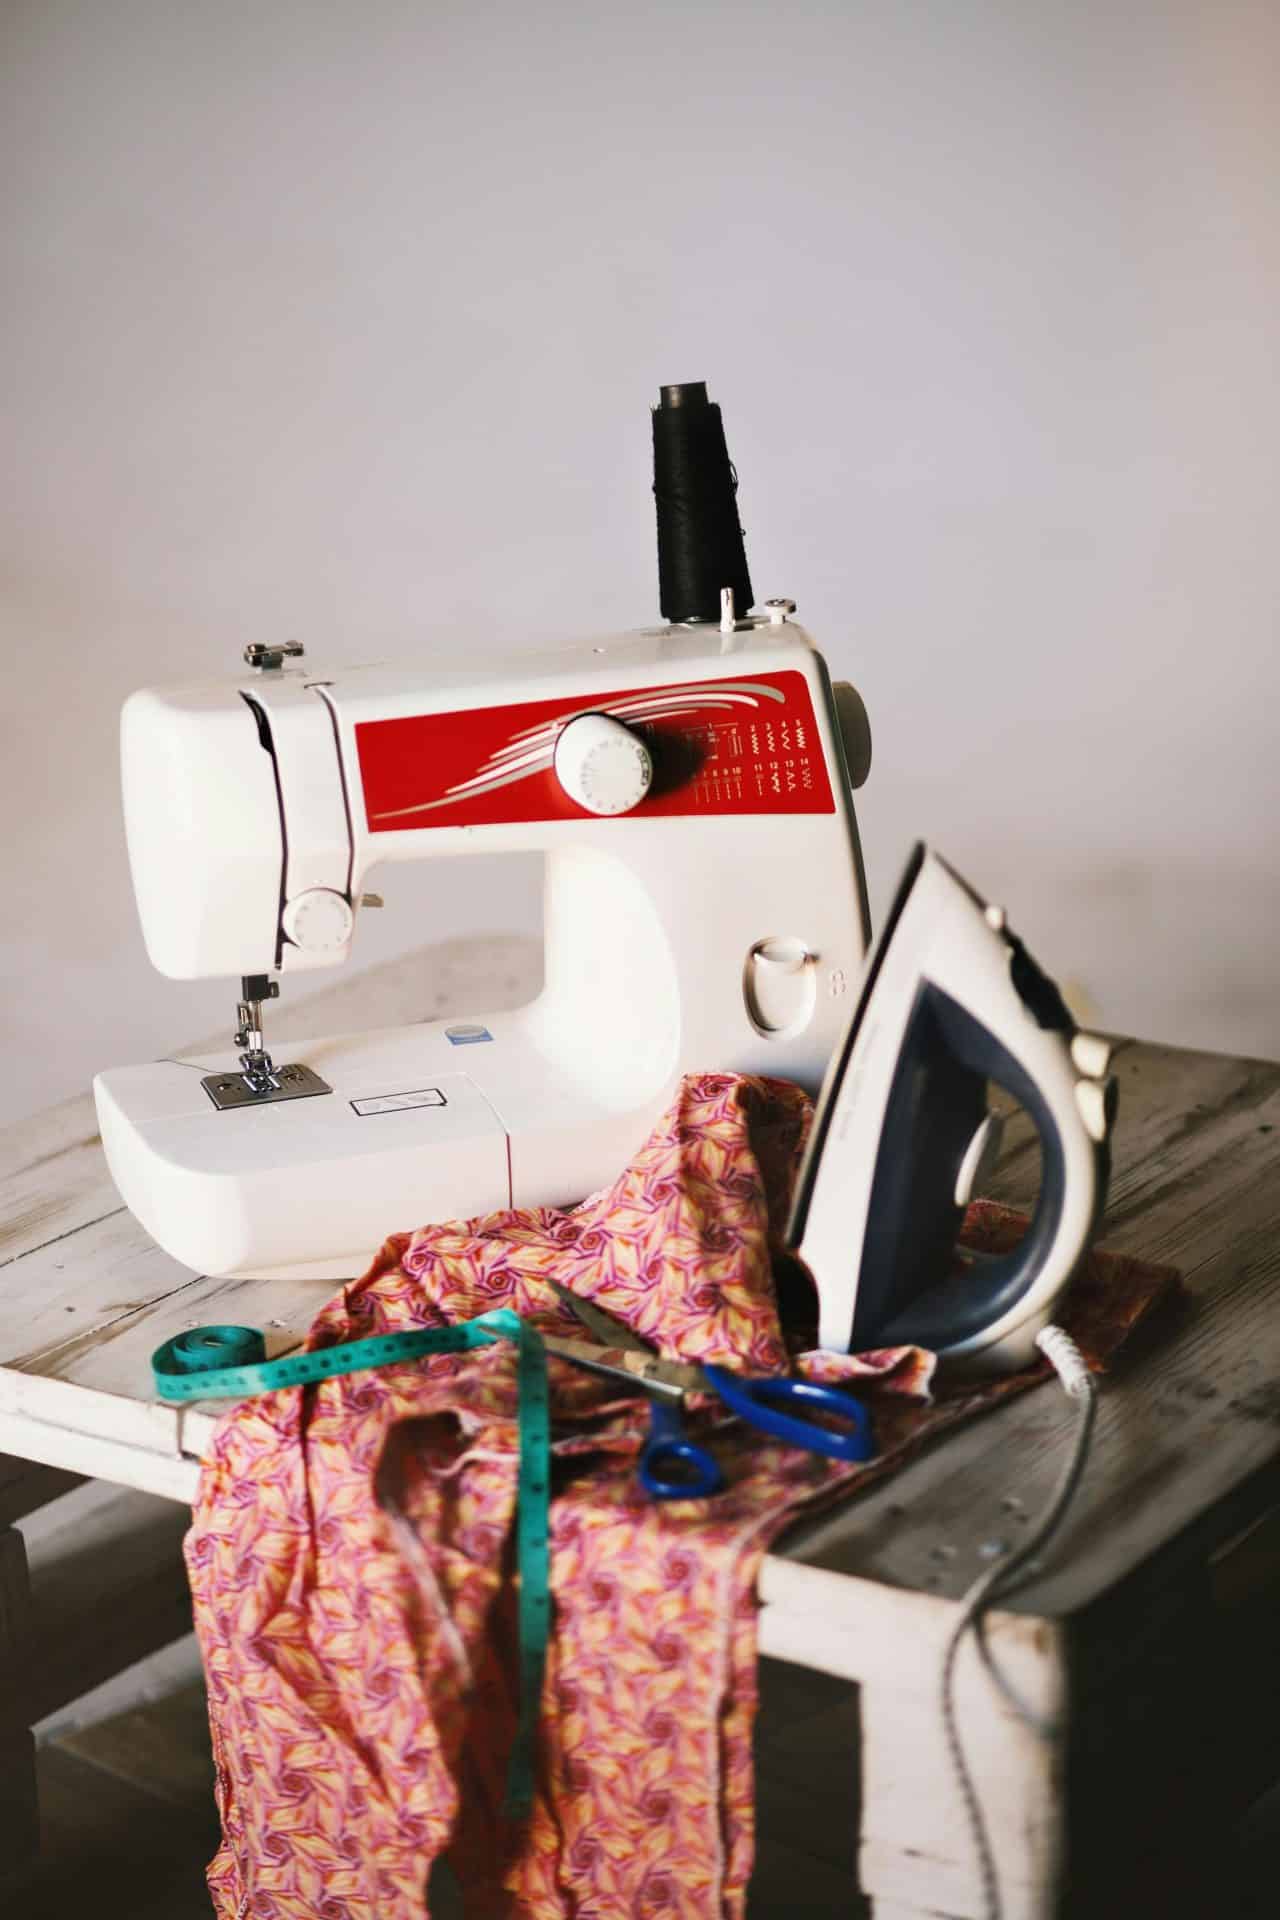 A picture of a sewing machine, an iron, red fabric and a tape measure on a table